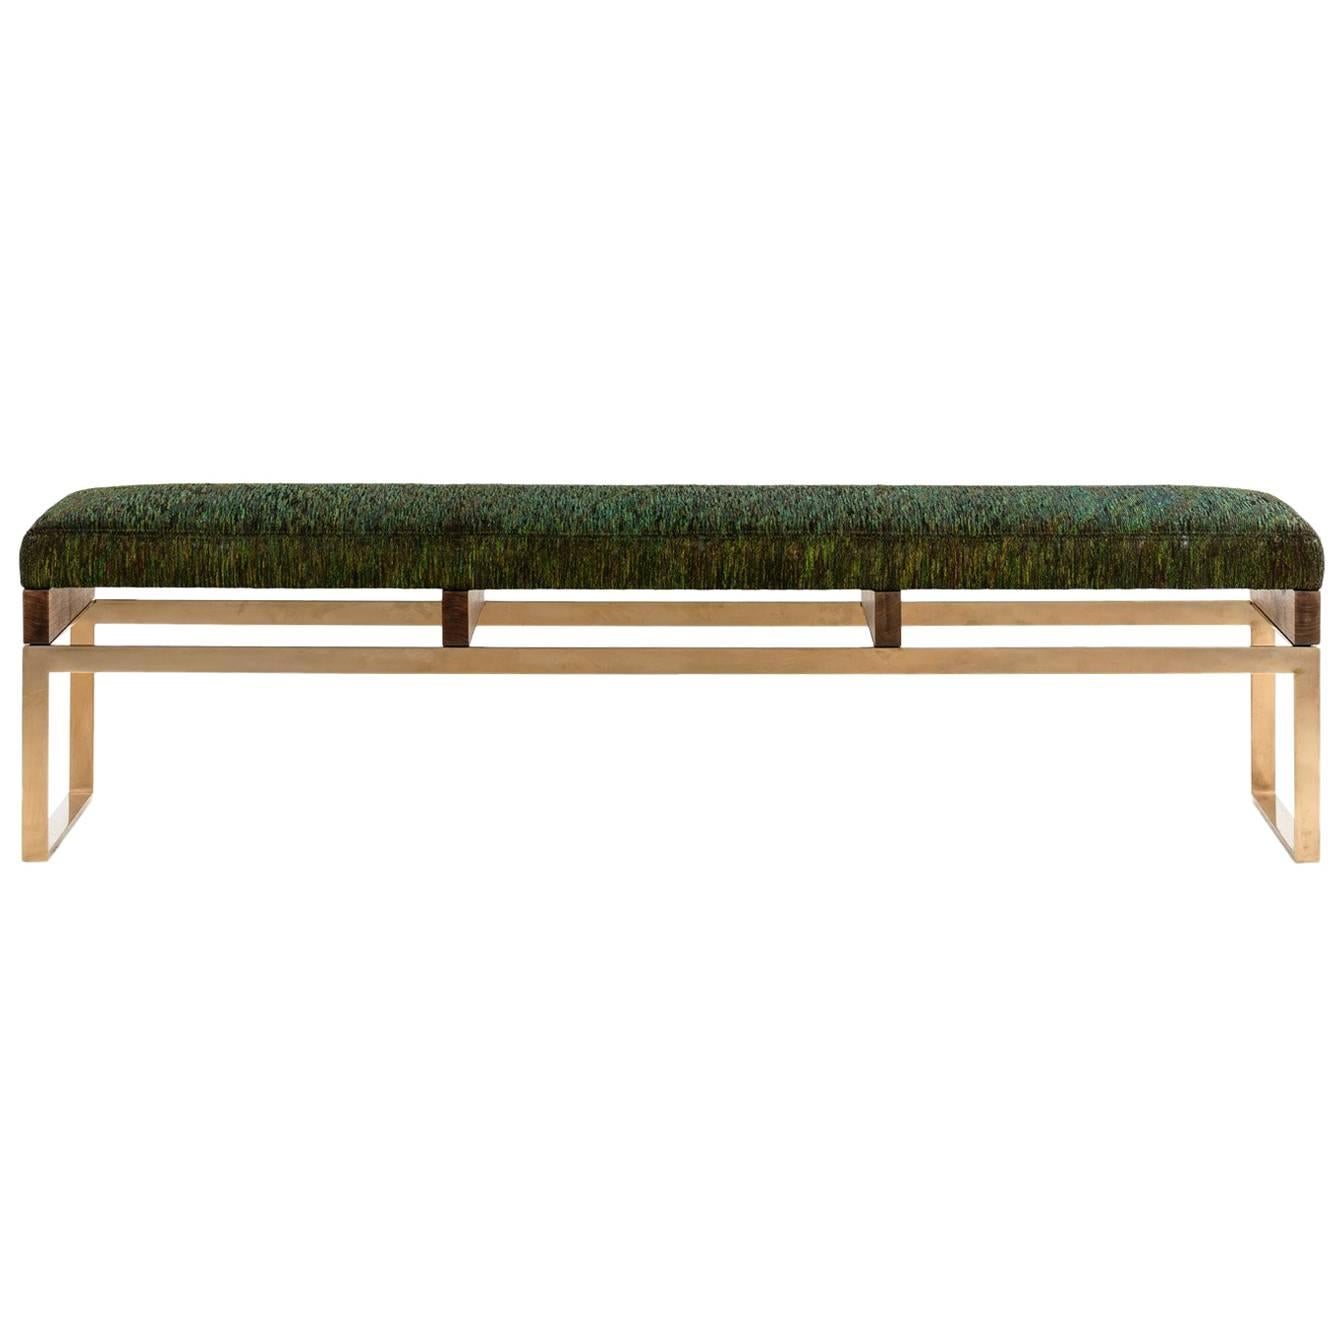 Maxim Bench with Bronze and Walnut Base, Woven Peacock Fabric Seat, COM or COL